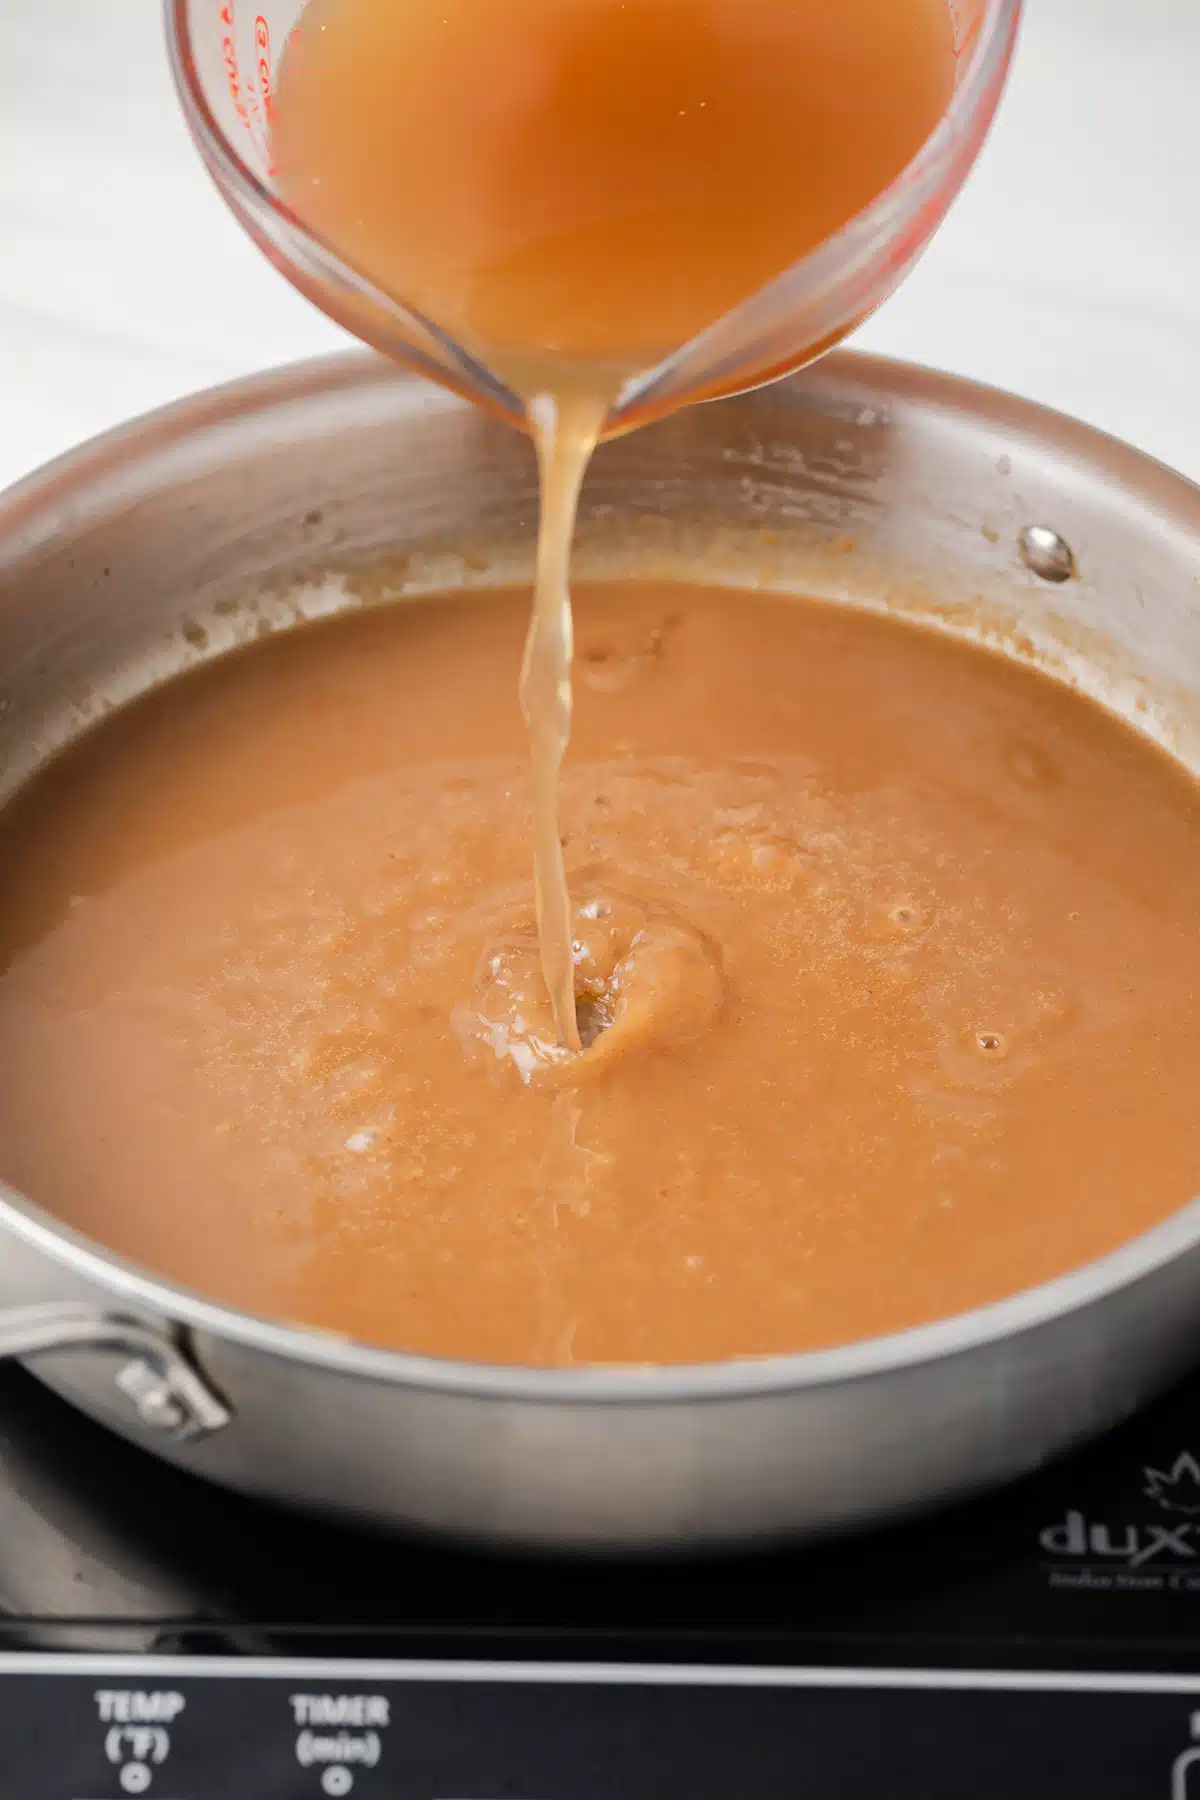 Broth being poured into brown roux.